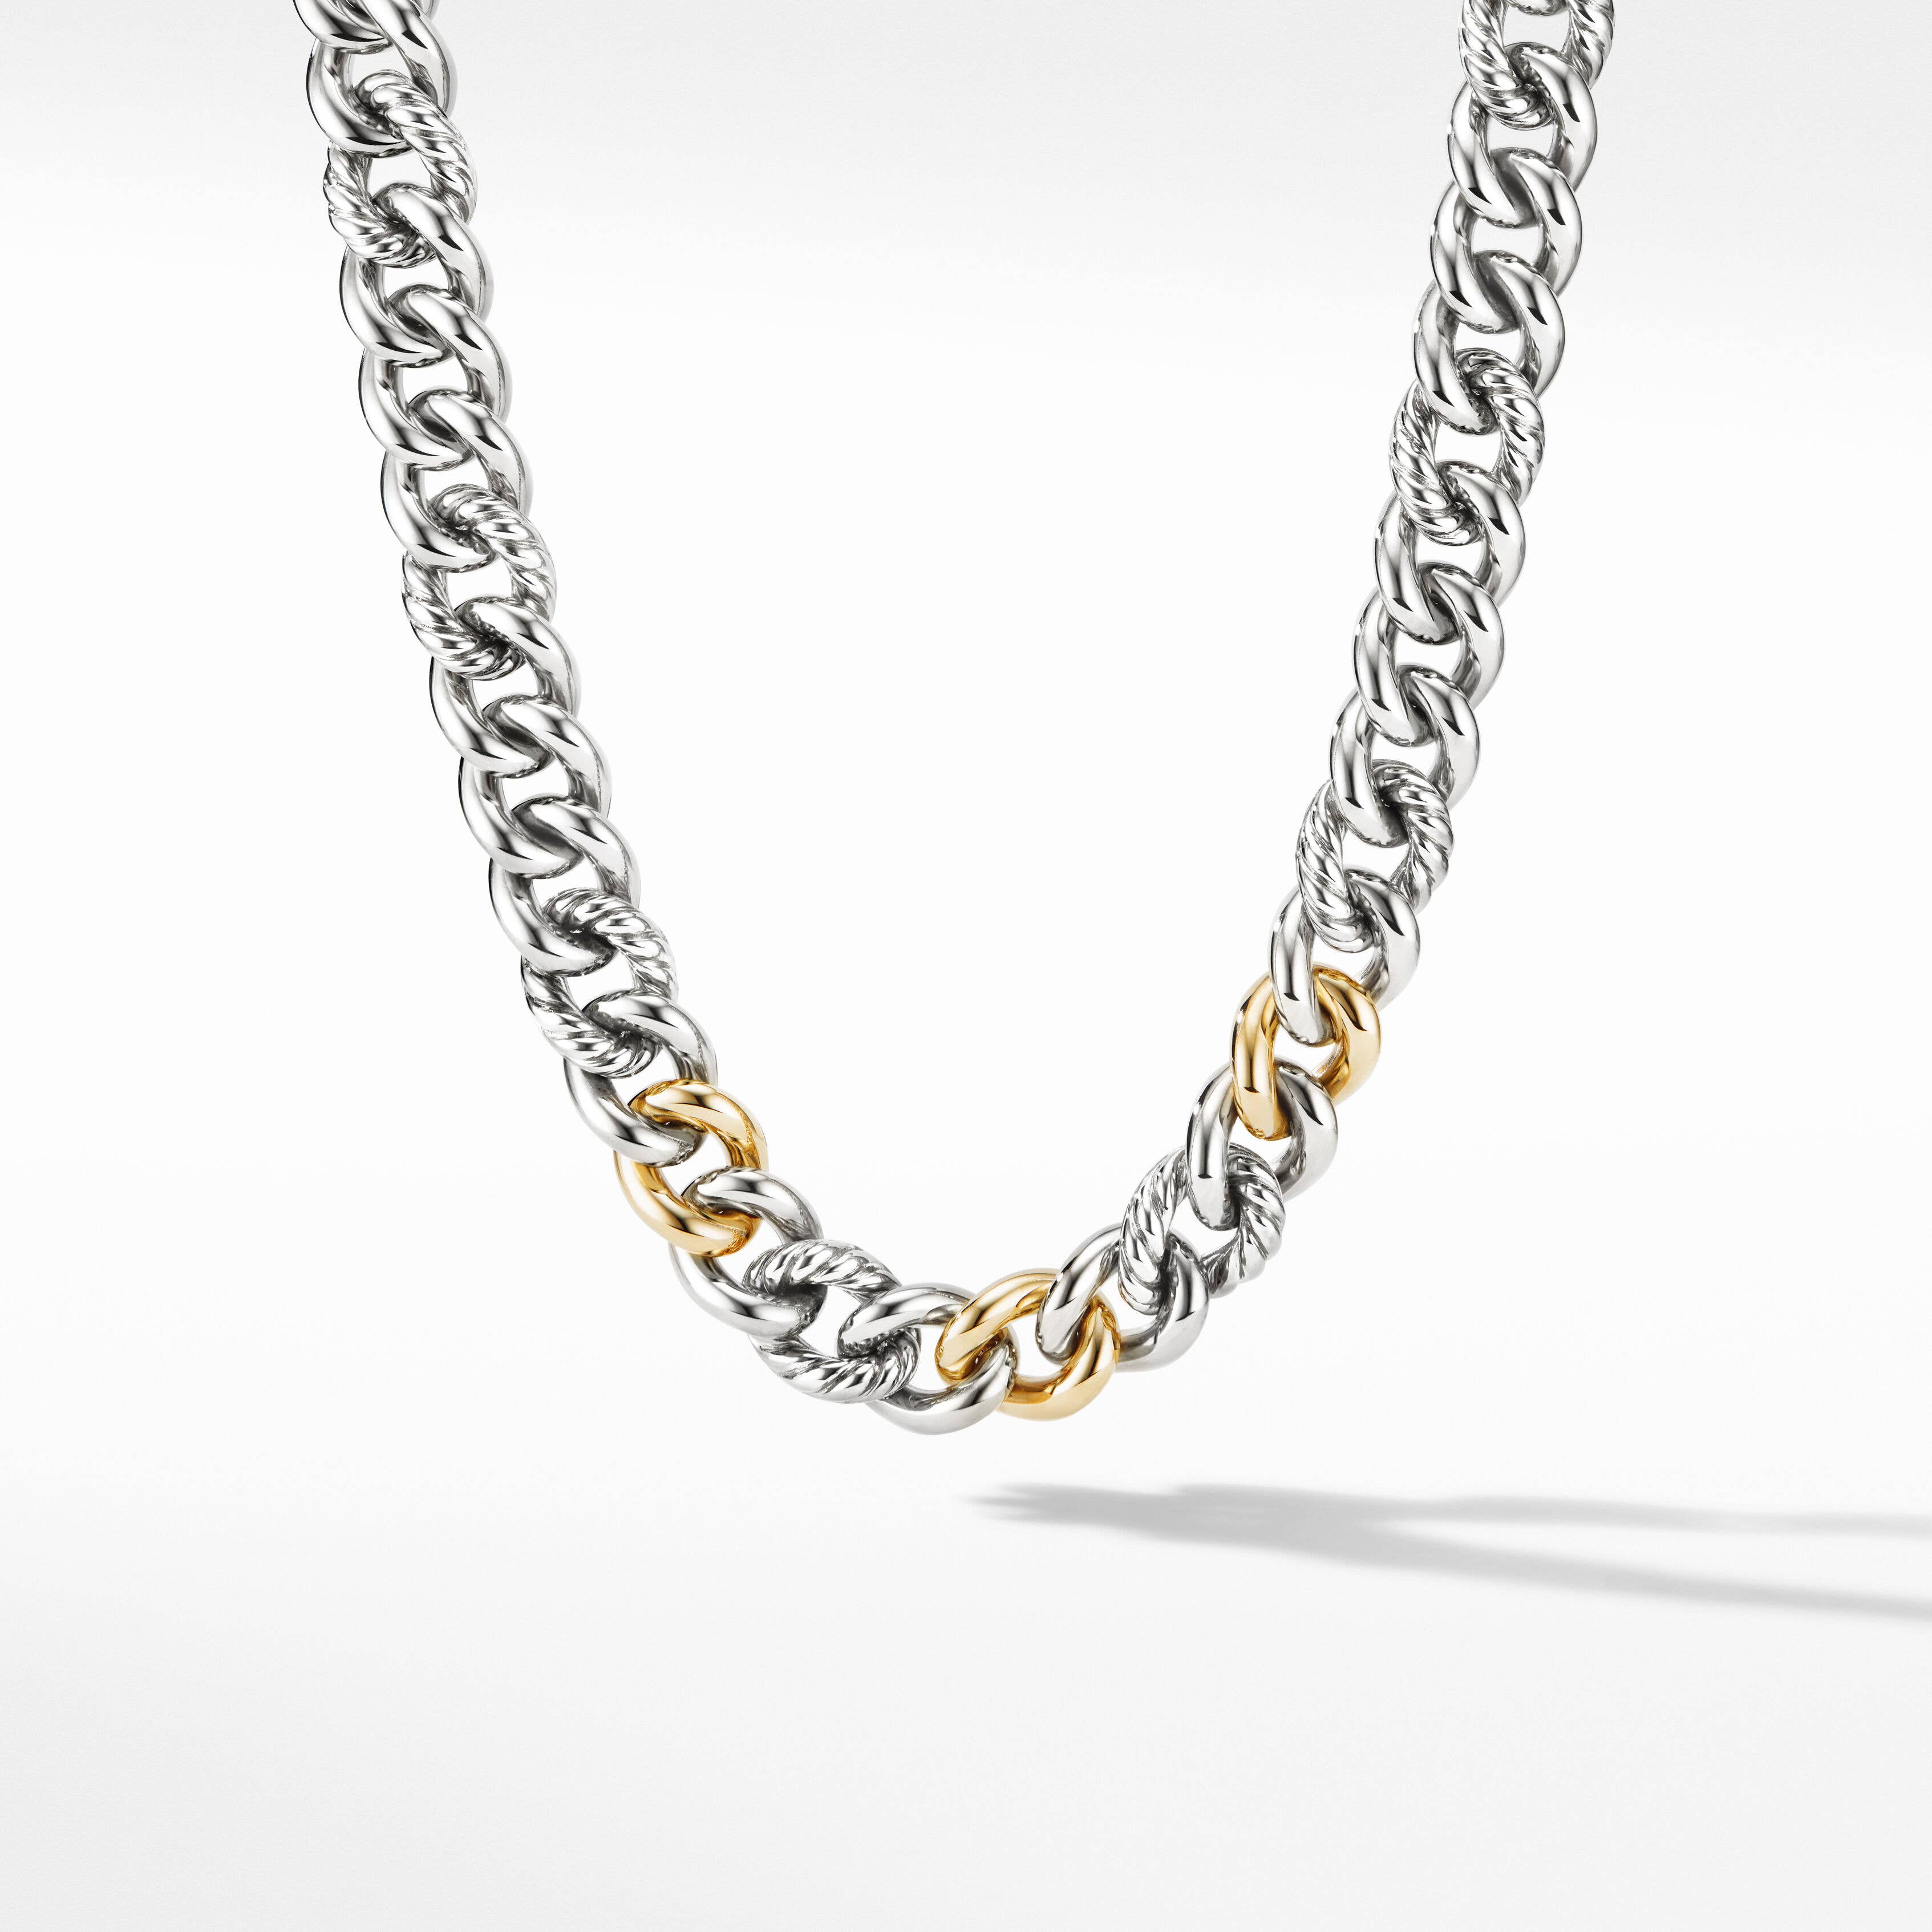 Curb Chain Necklace in Sterling Silver with 18K Yellow Gold